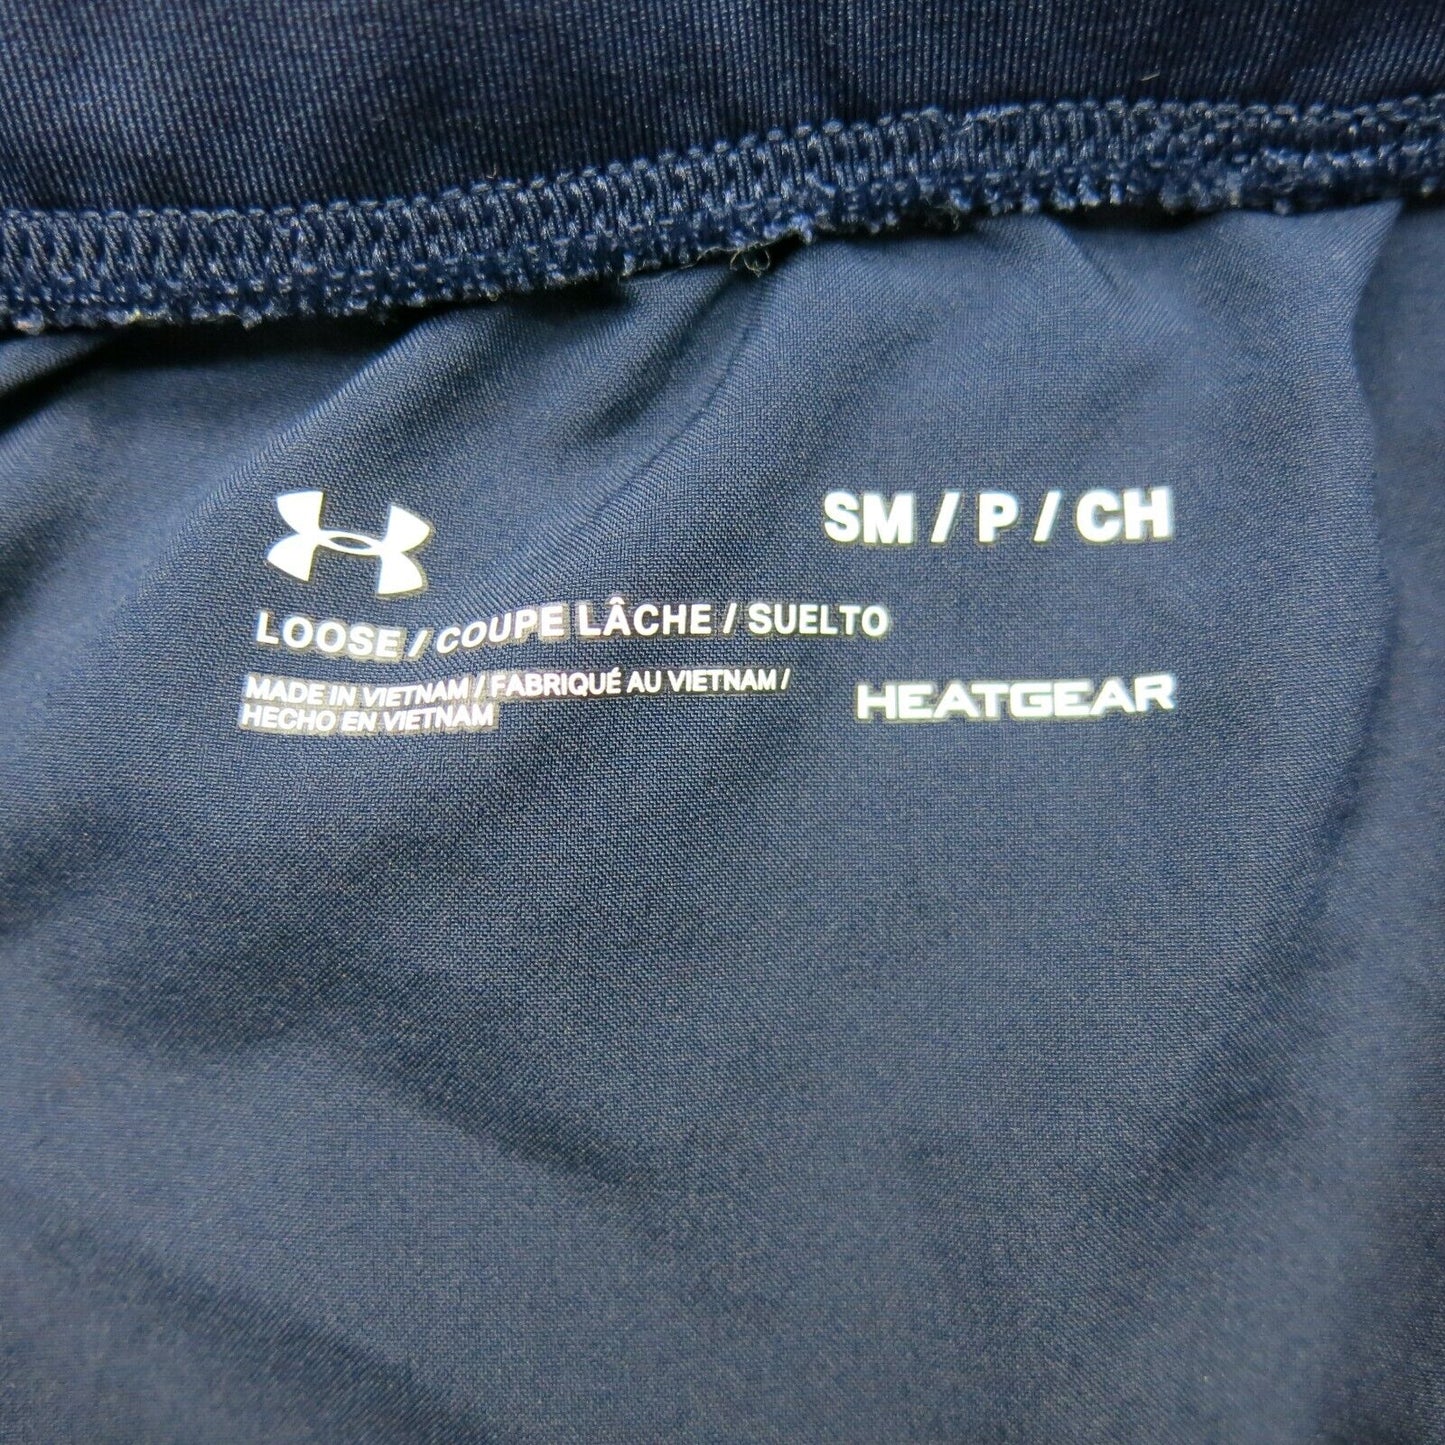 Under Armour Womens Activewear Shorts Heatgear Mid Rise Navy blue Size Small